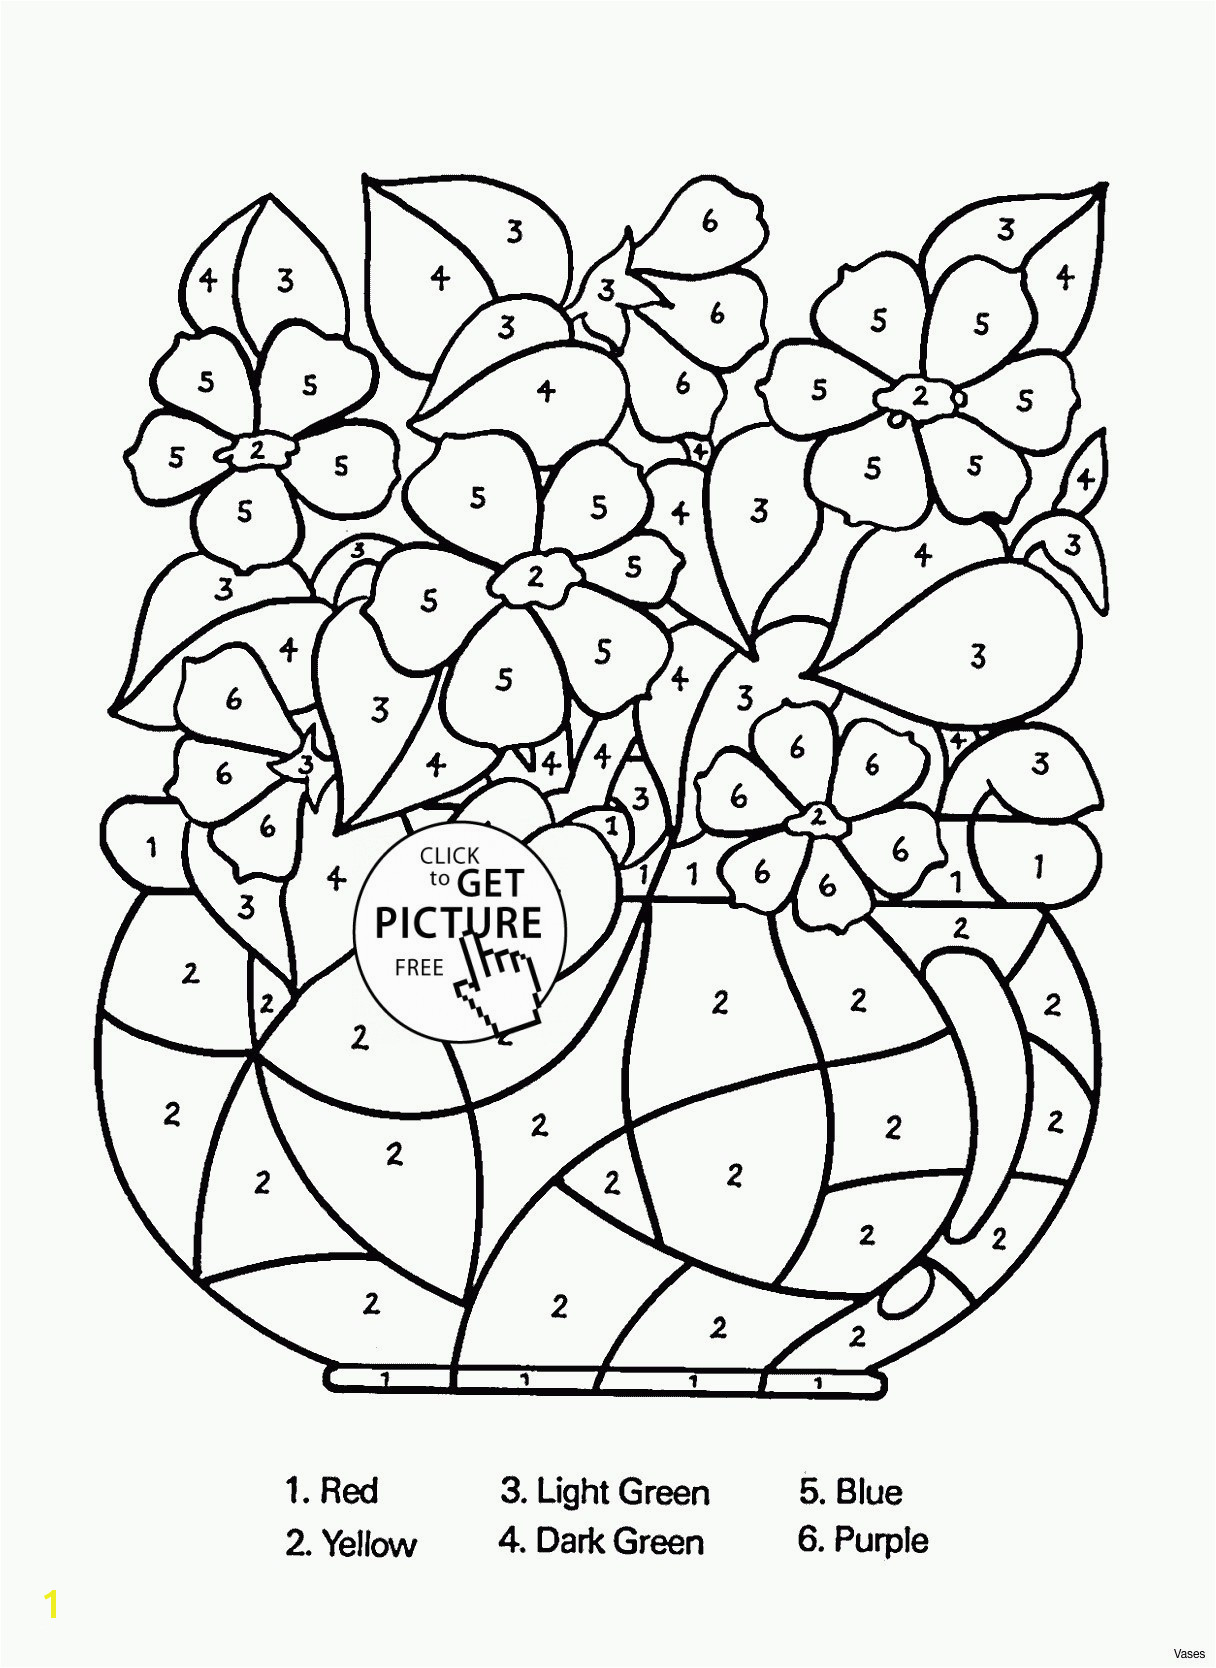 Brain Coloring Page Awesome Brain Coloring Page New Coloring Pages Line New Line Coloring 0d